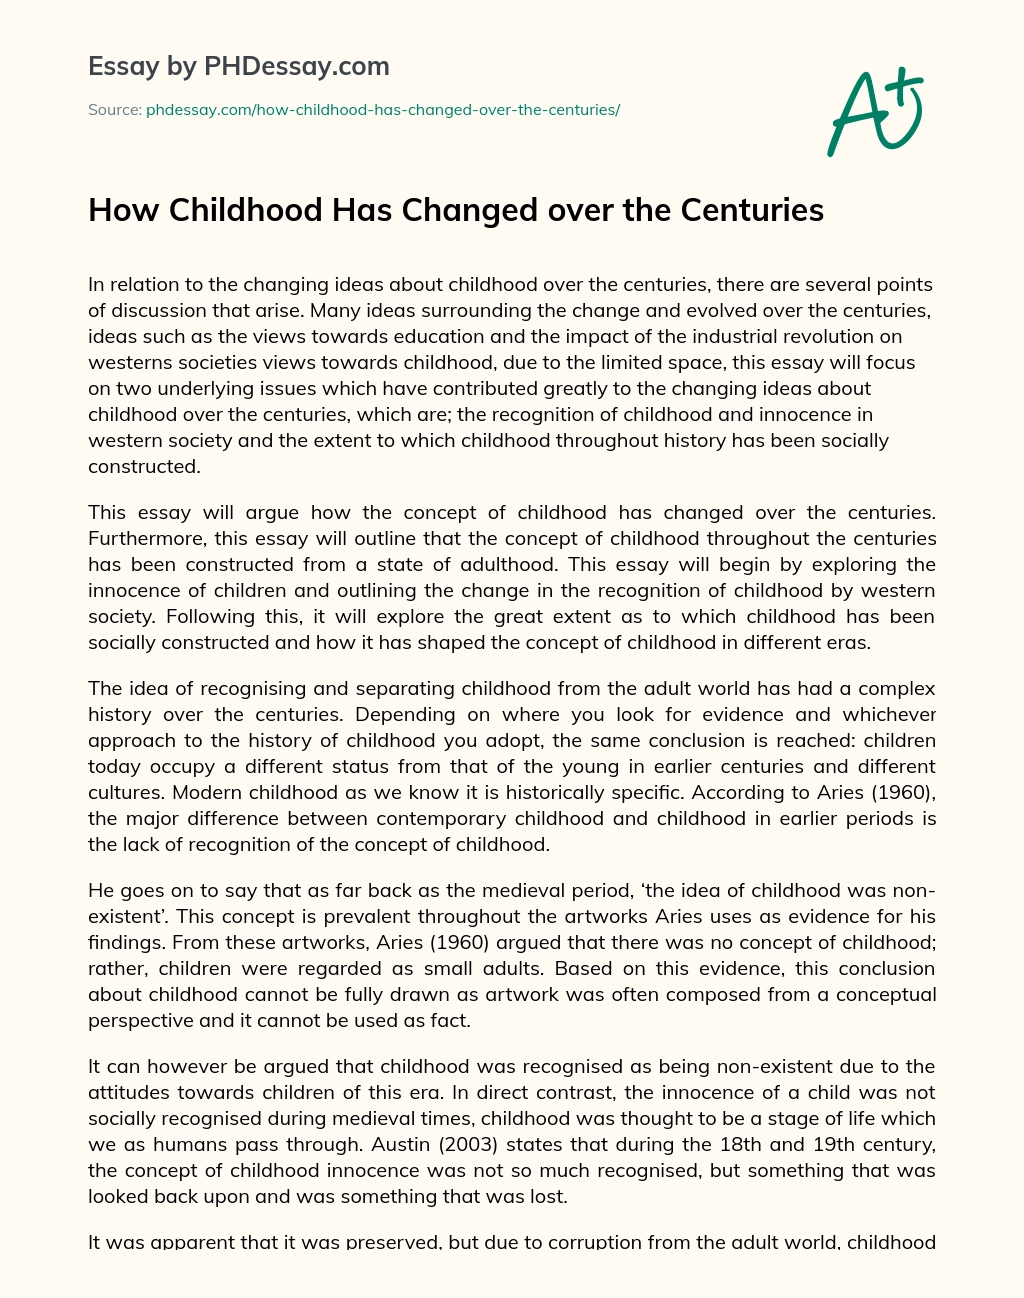 How Childhood Has Changed over the Centuries essay